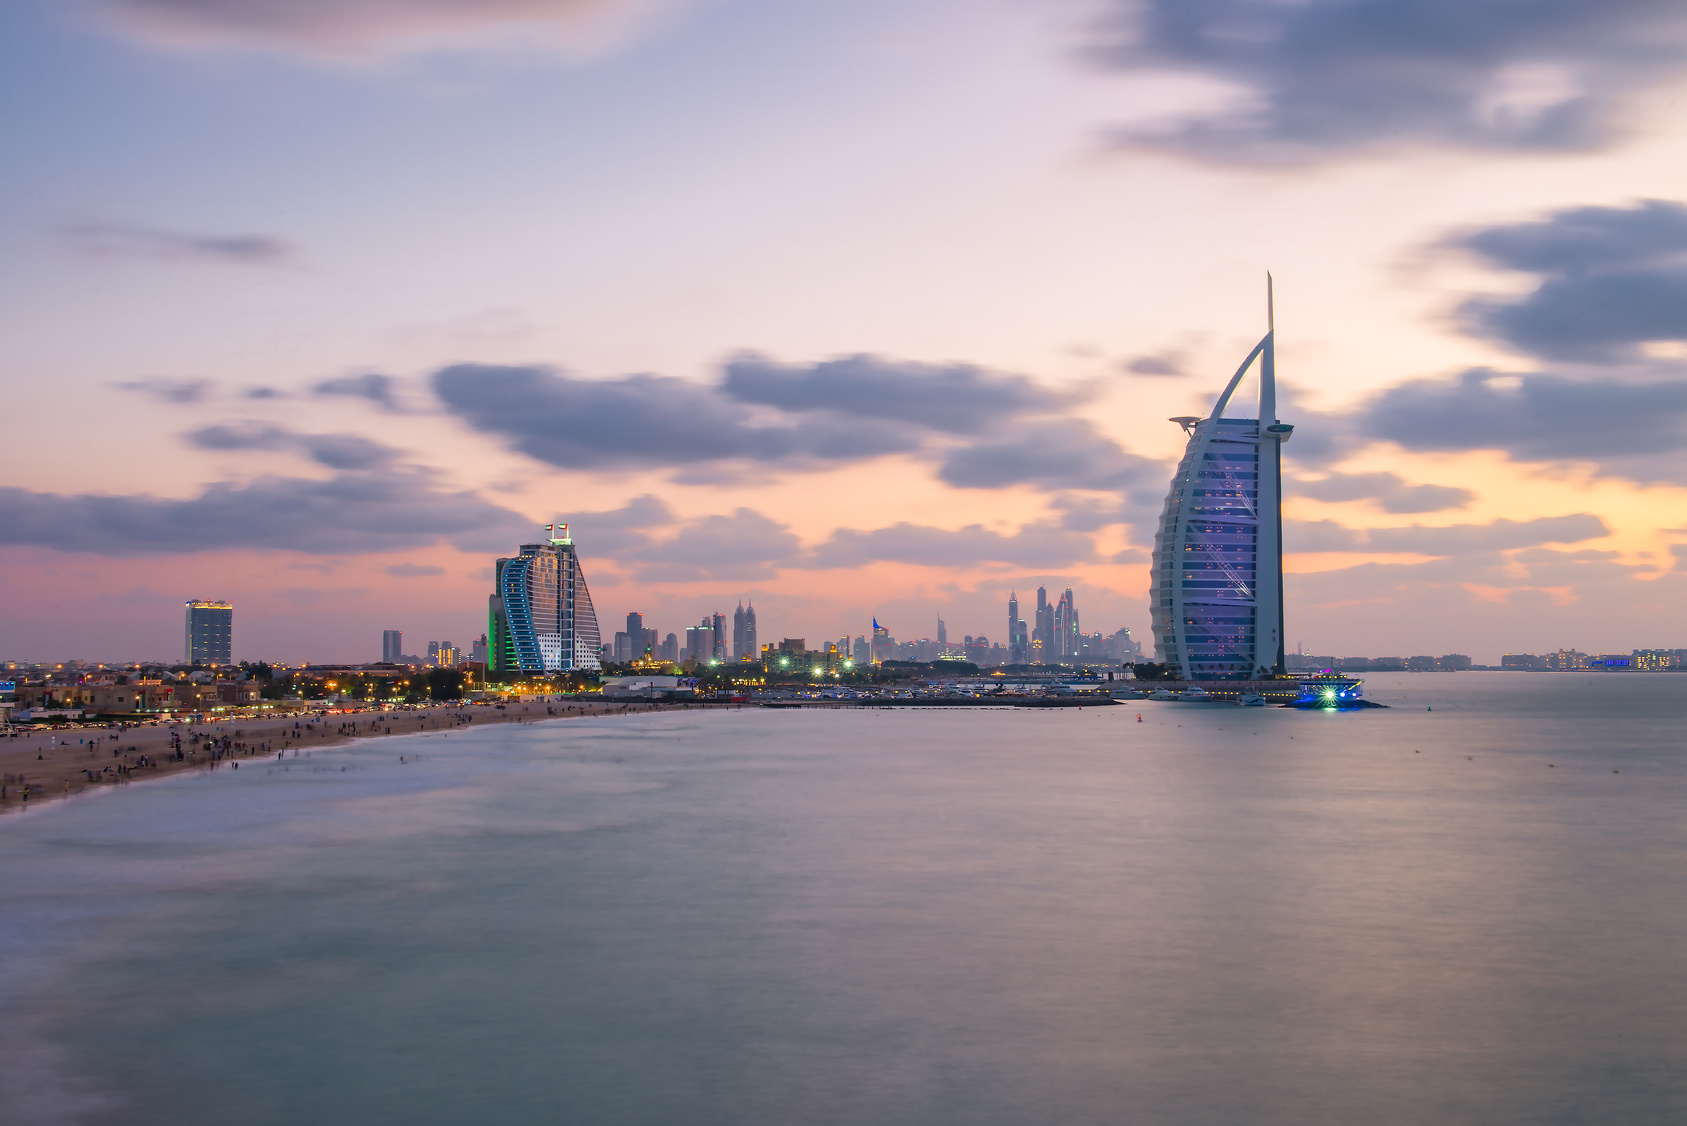 View of the illuminated Burj Al Arab and Jumeirah Beach Hotel at the sunset. View from the Jumeirah beach opposite side, Dubai. Burj Al Arab is a luxury 7 stars hotel built on an artificial island.